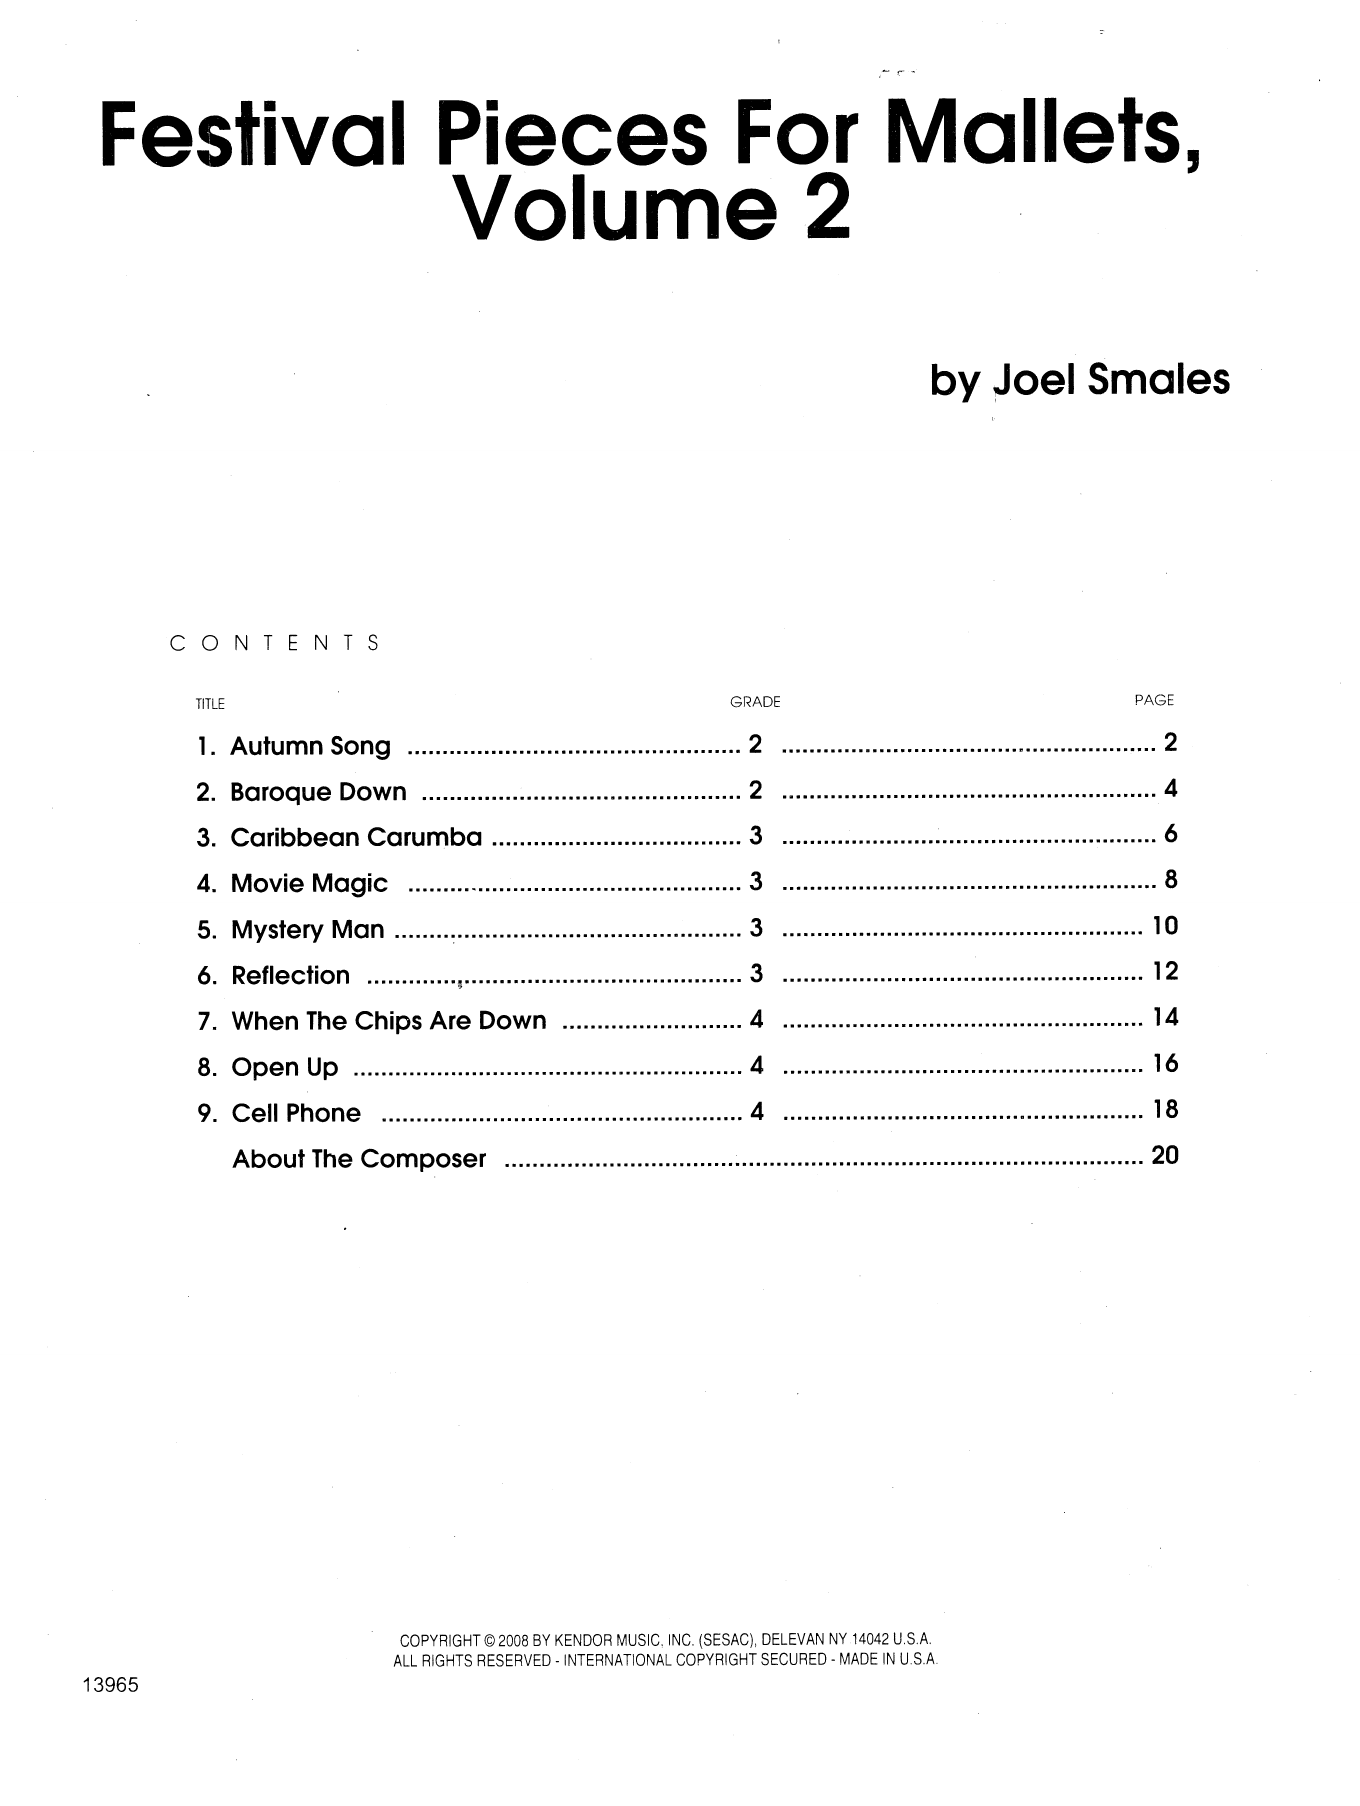 Download Joel Smales Festival Pieces For Mallets, Volume 2 Sheet Music